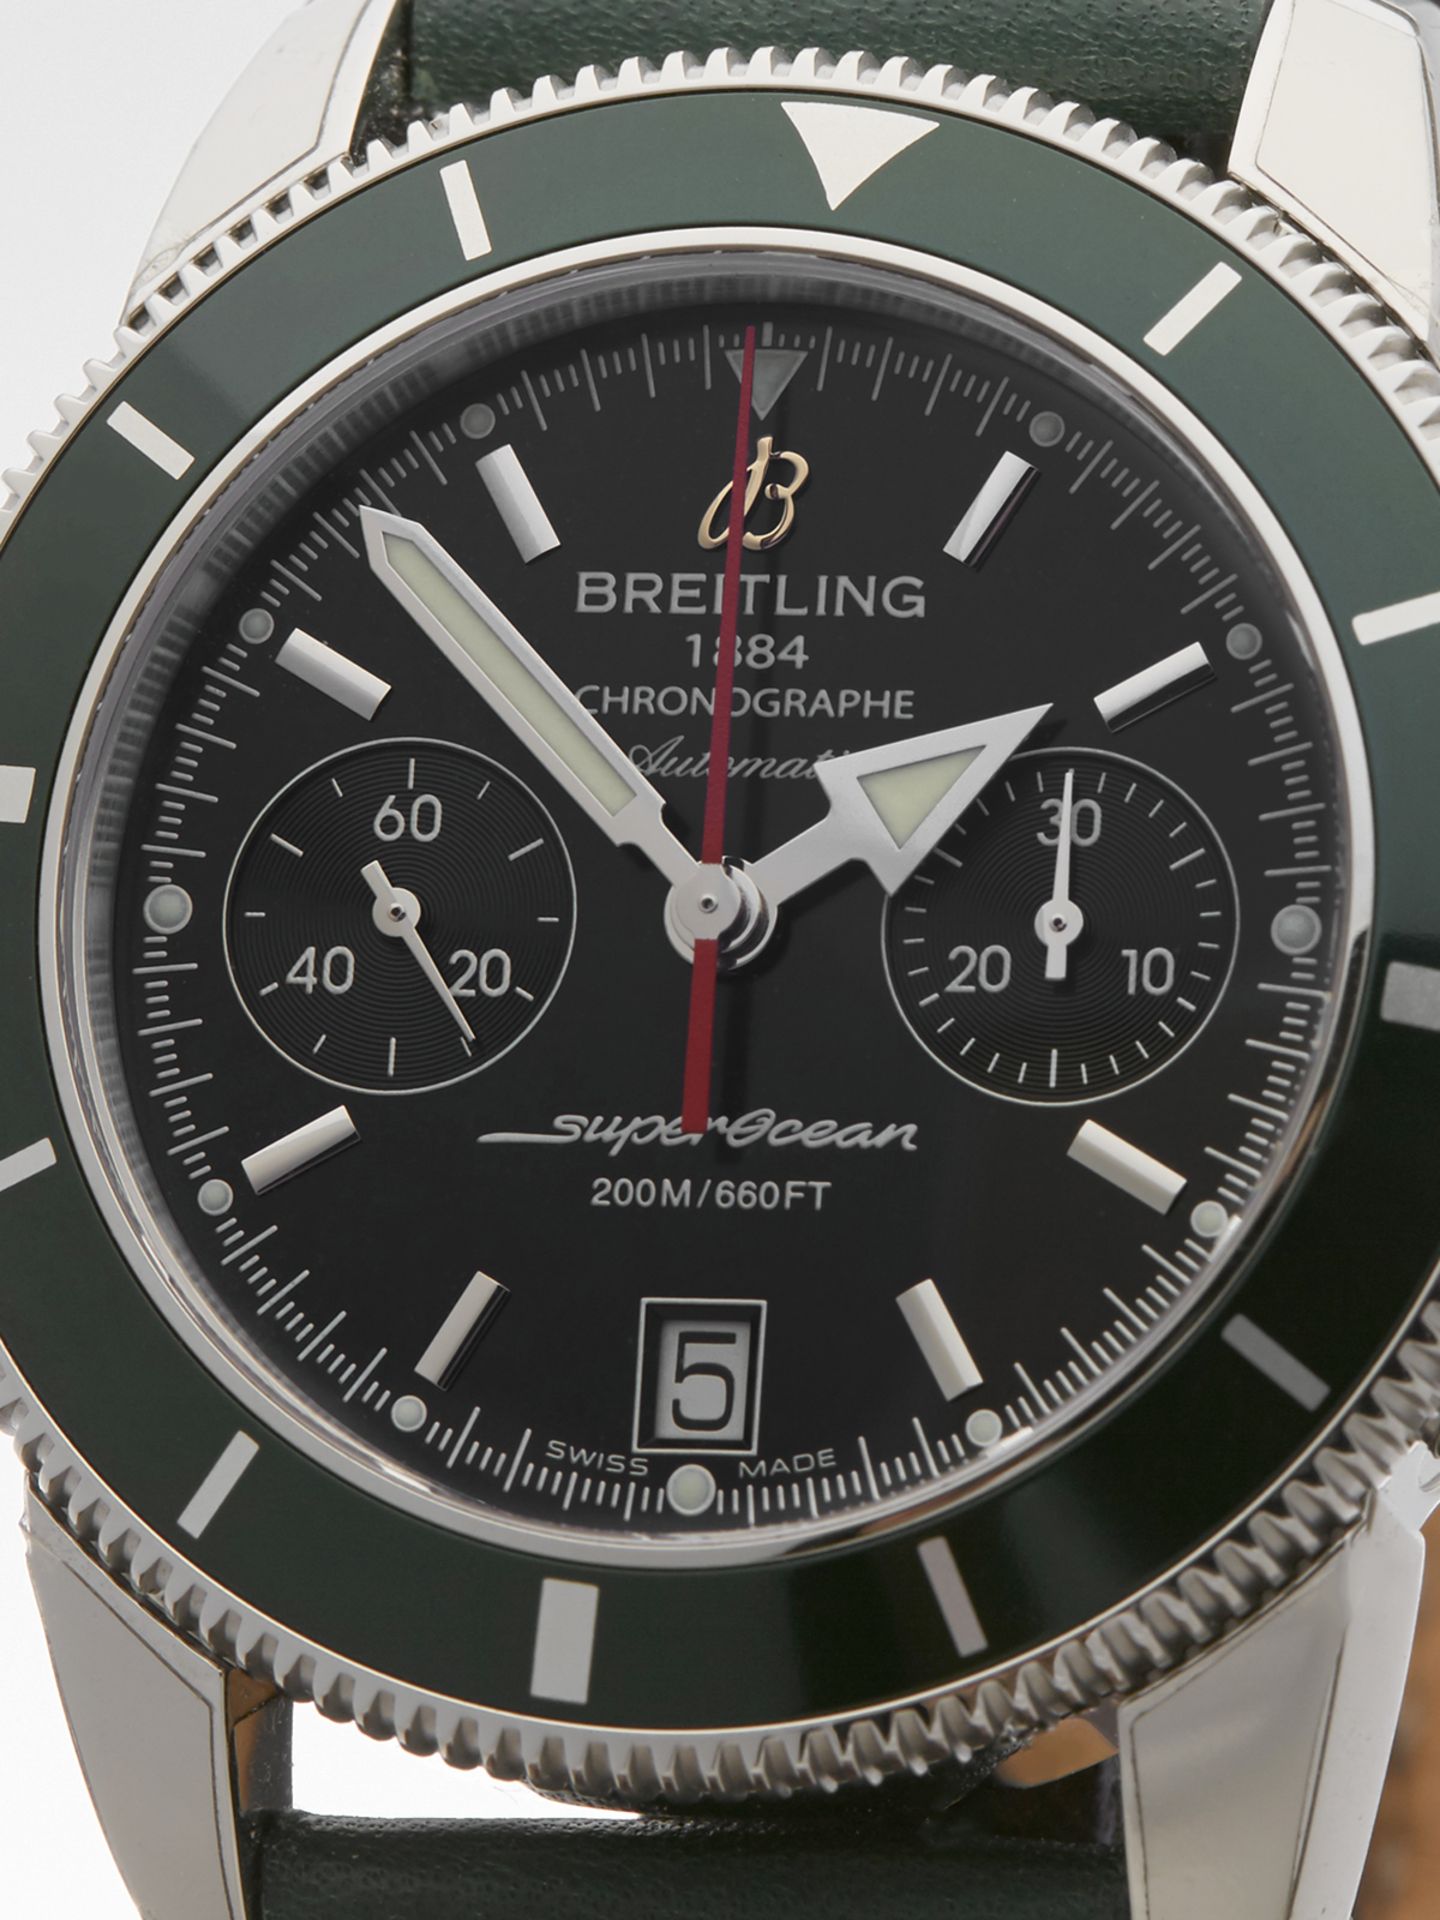 Breitling Superocean Heritage Chronograph 44mm Stainless Steel A2337036.BB81.748P - Image 3 of 9